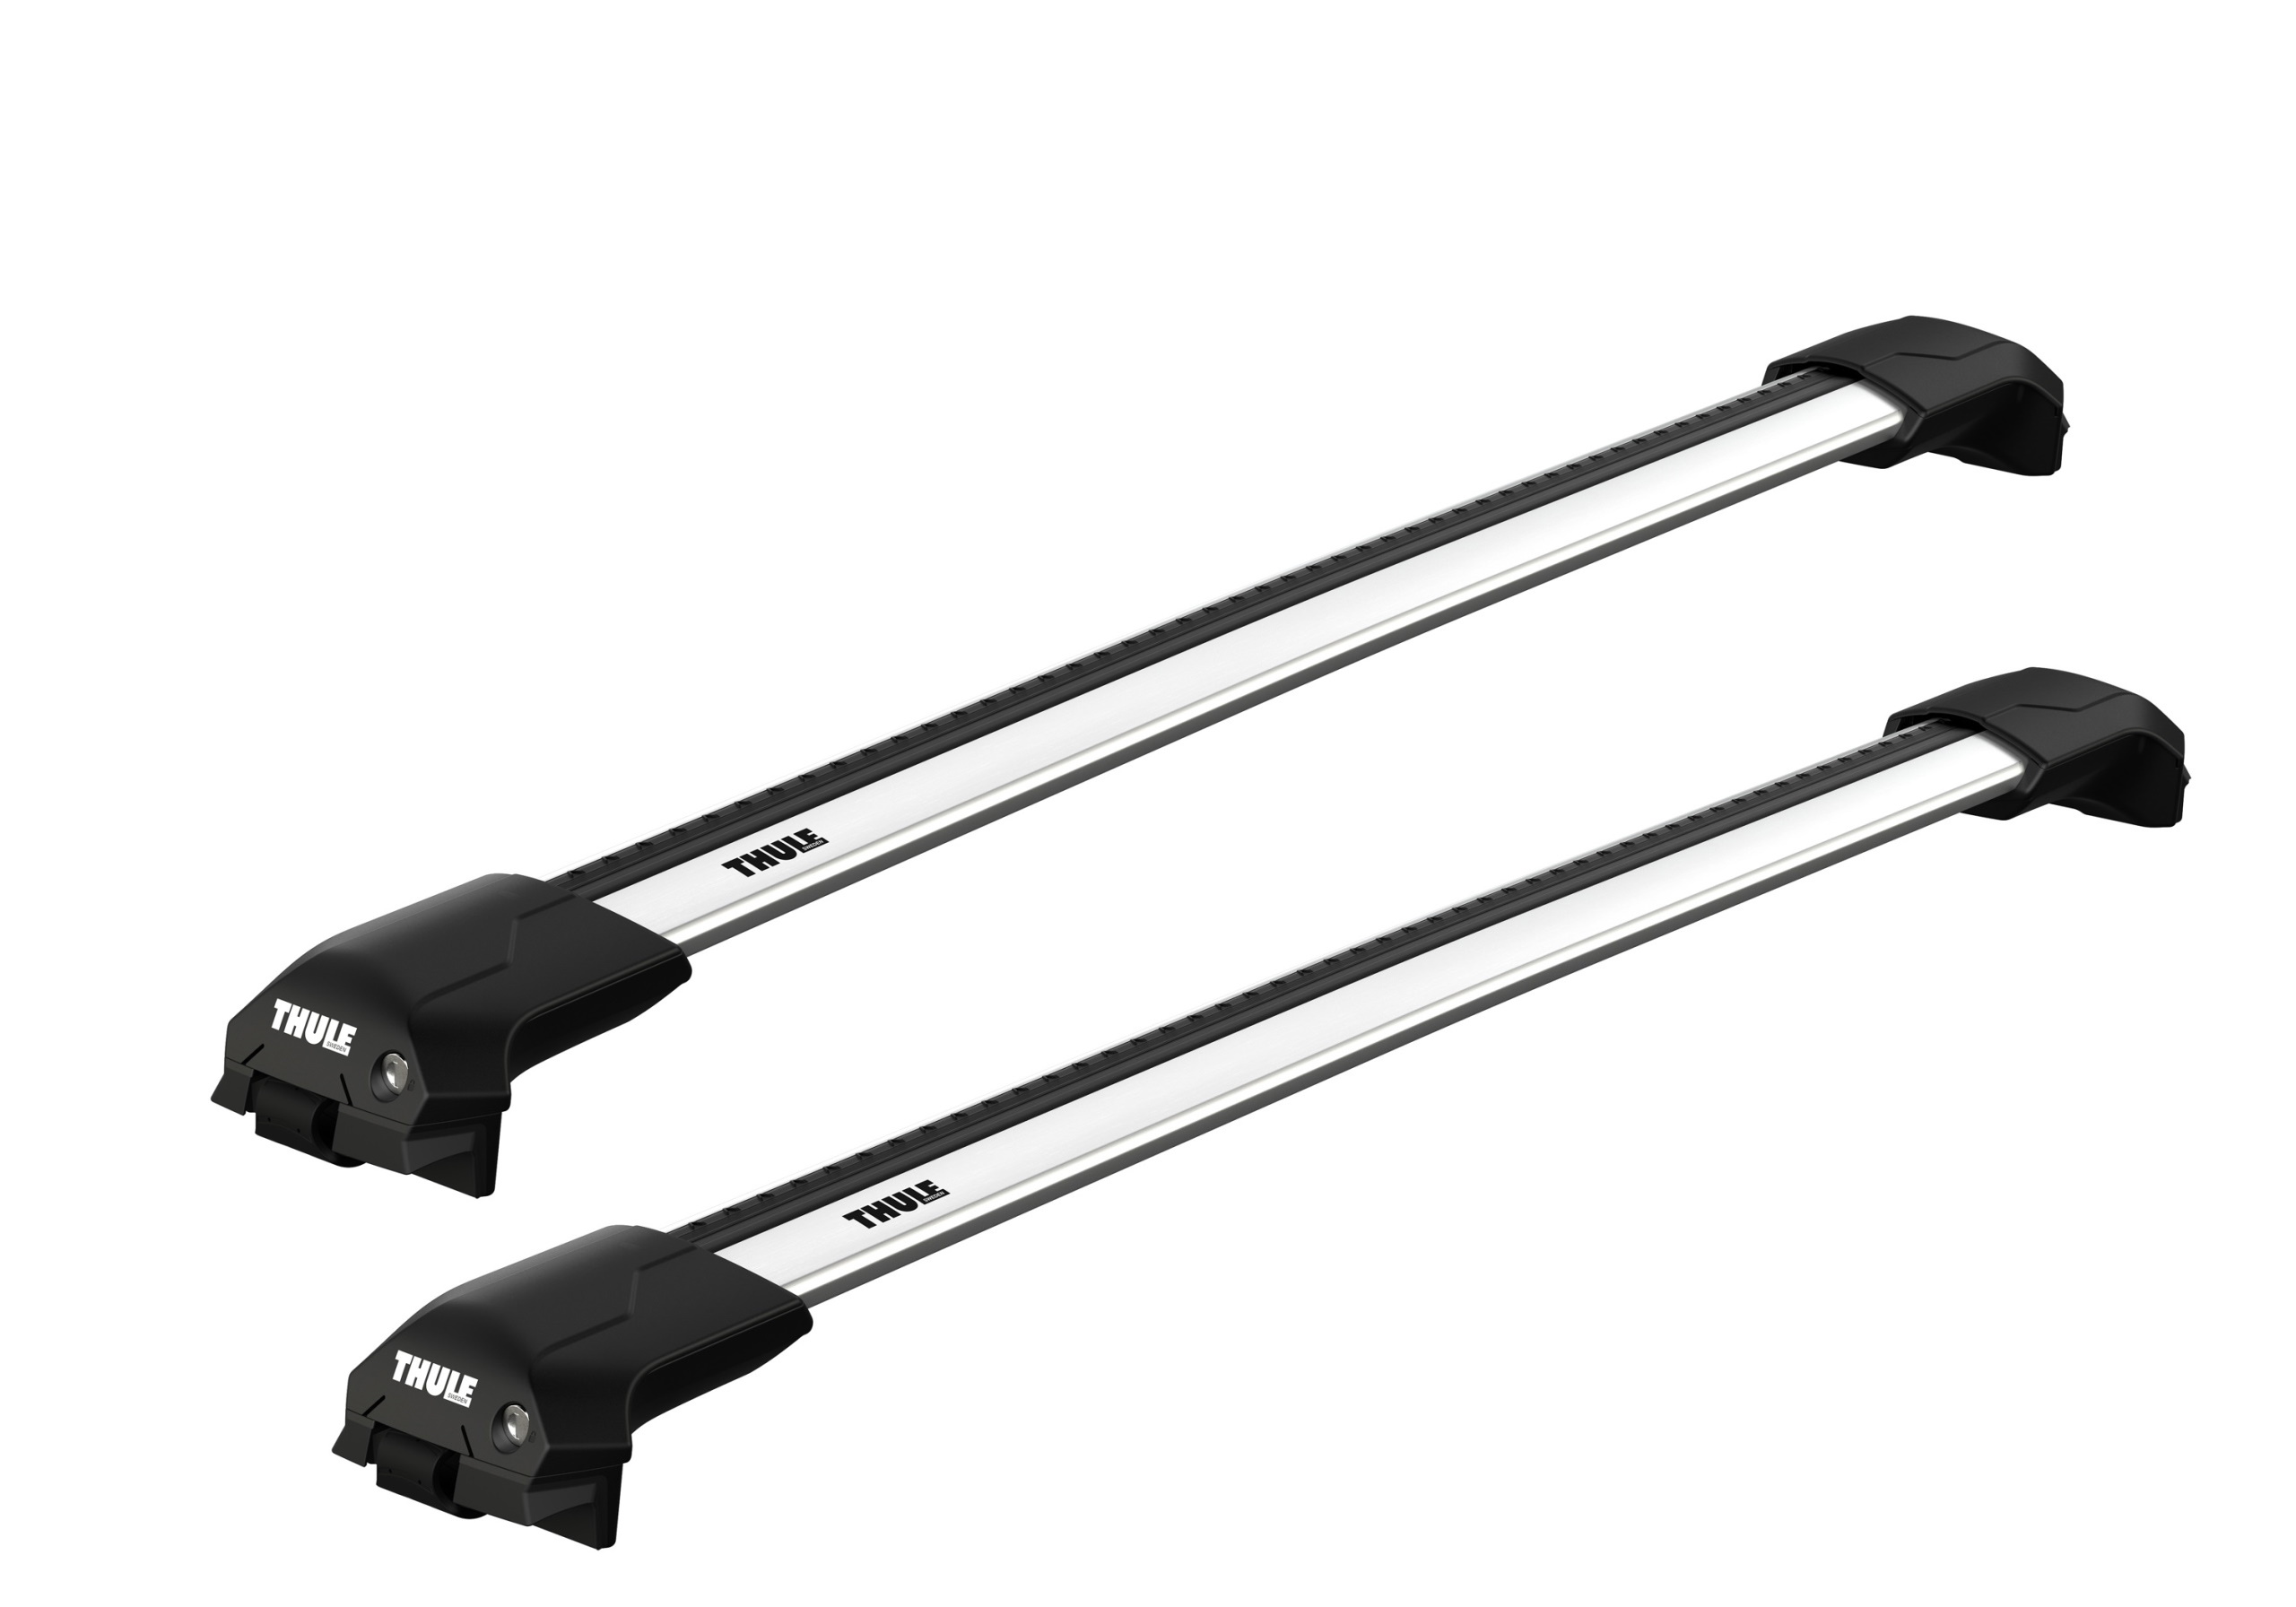 Cadillac BLS wagon (2007 to 2010):Thule Edge silver WingBars package - 7204, 7213, 7213